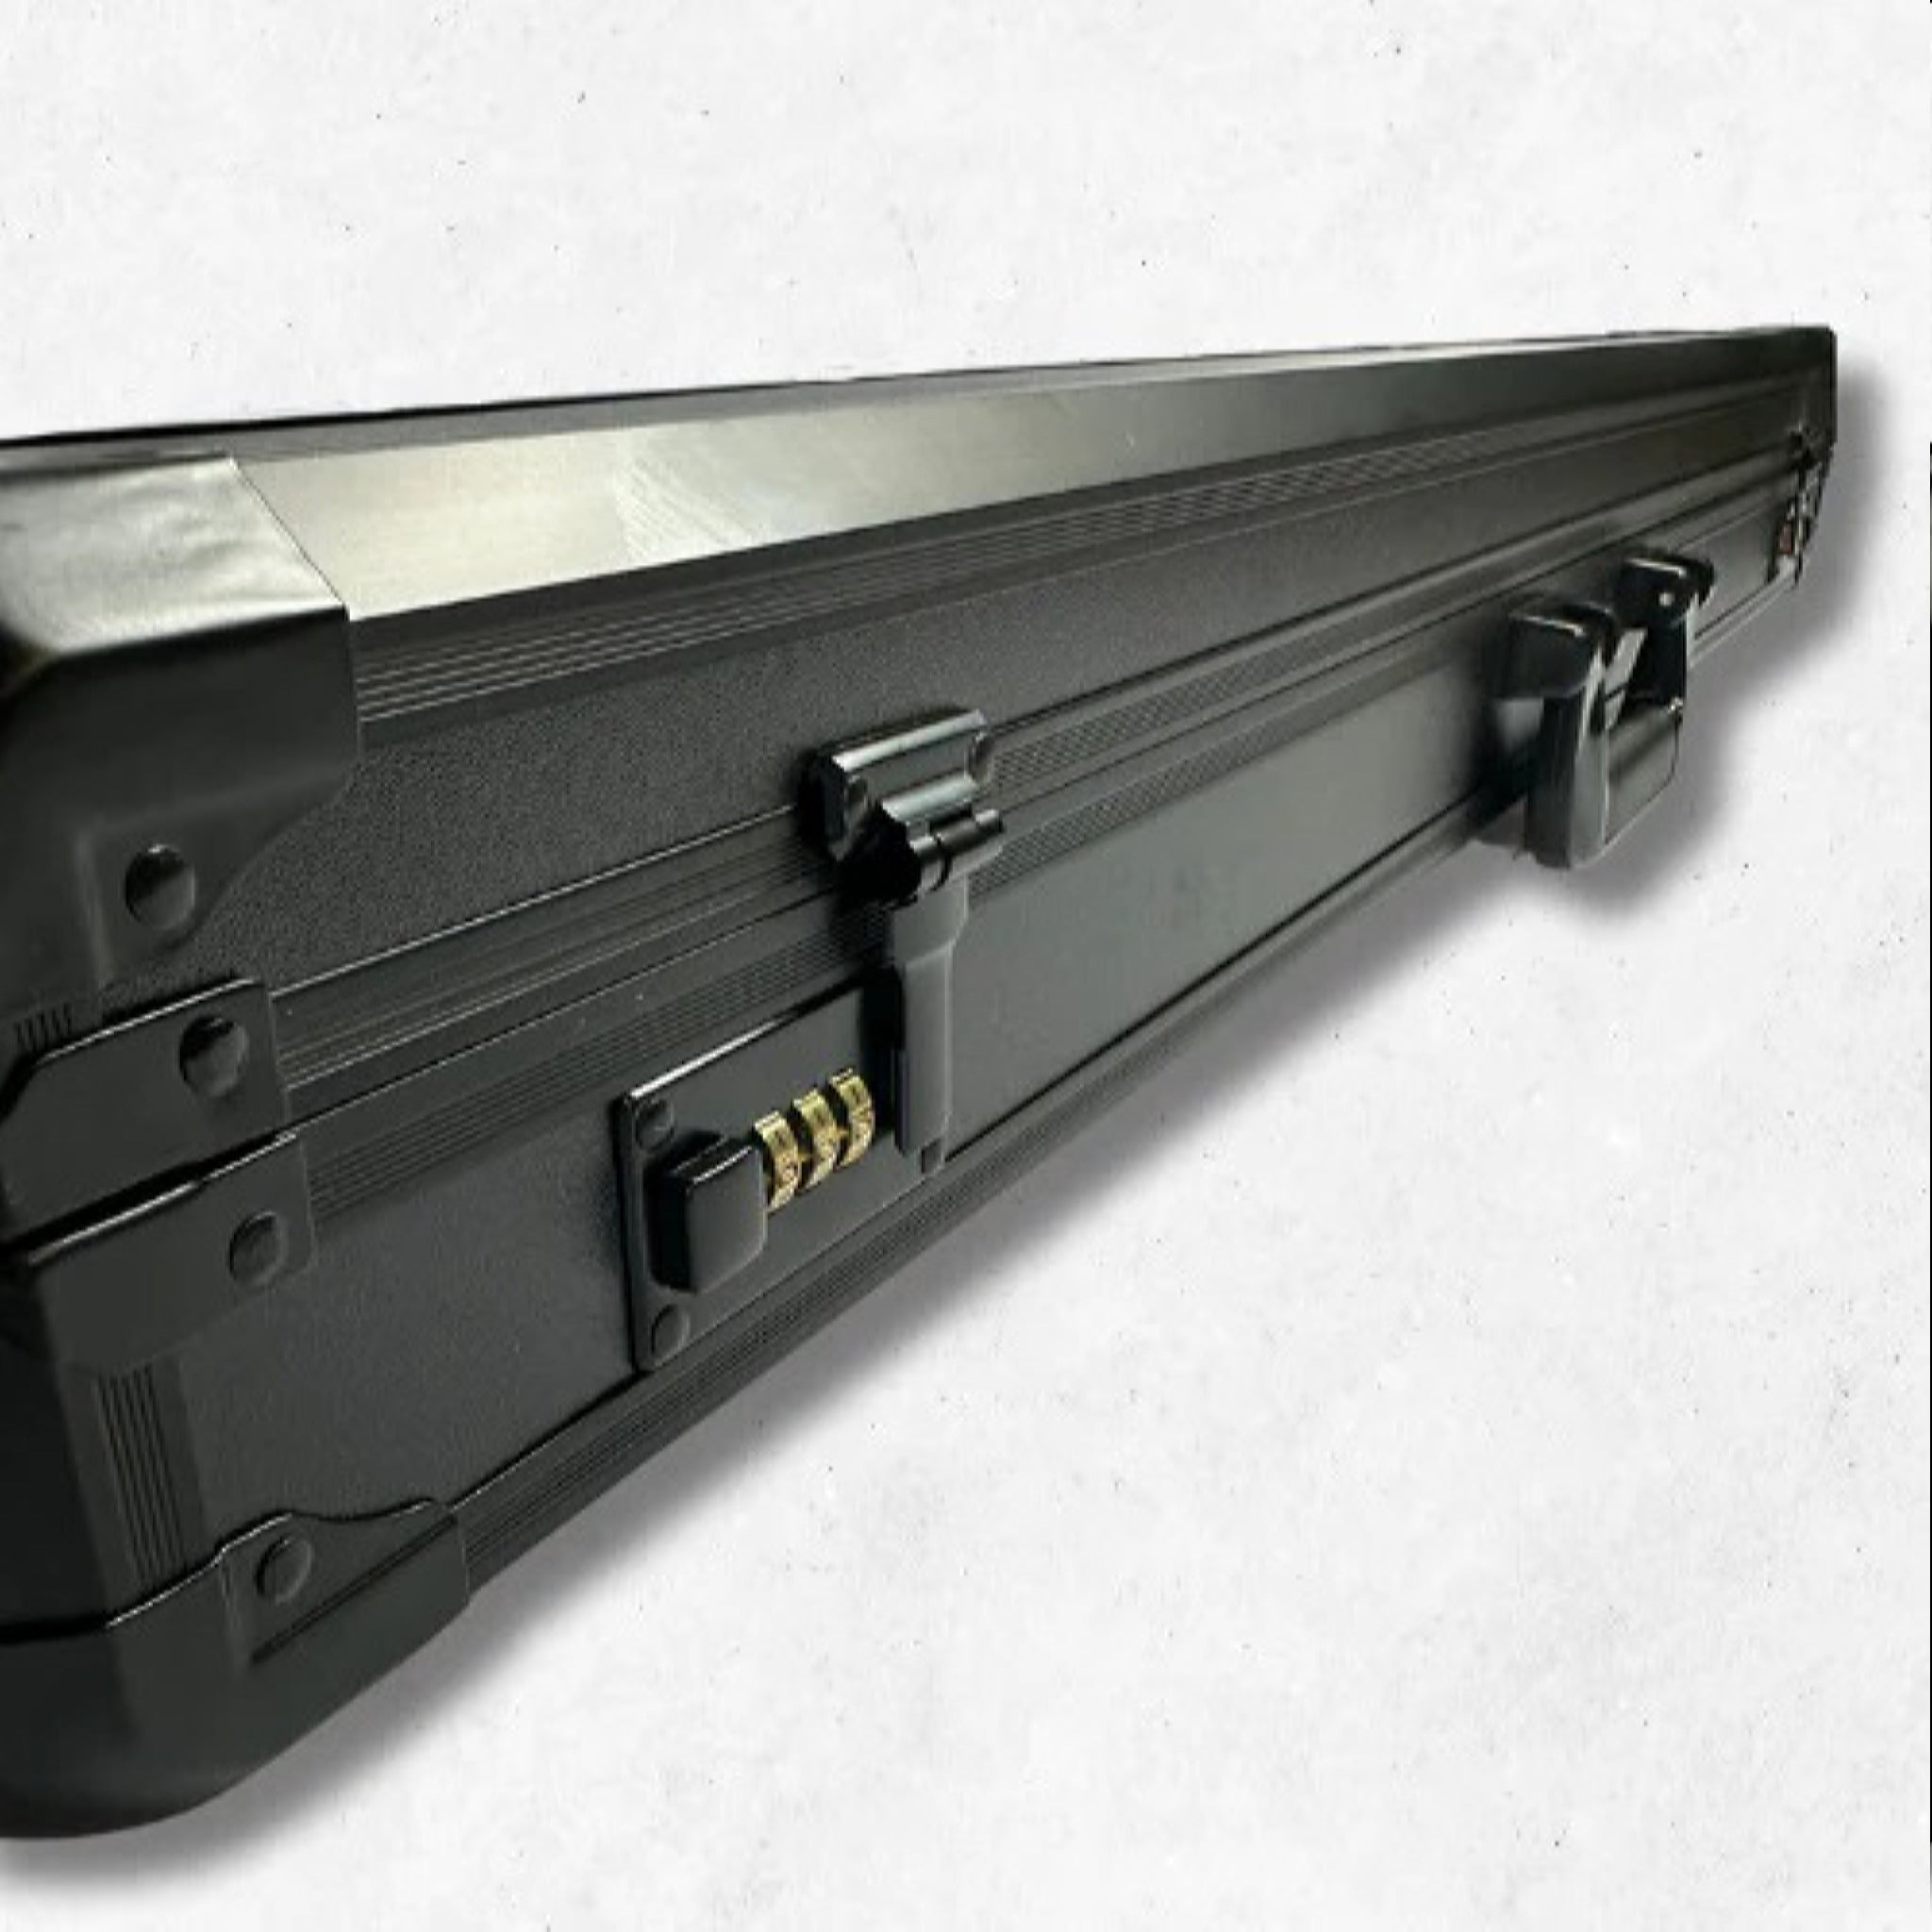 Combat Lightsaber Accessory Hard Shell Carry Case with Number Lock 97cm Black